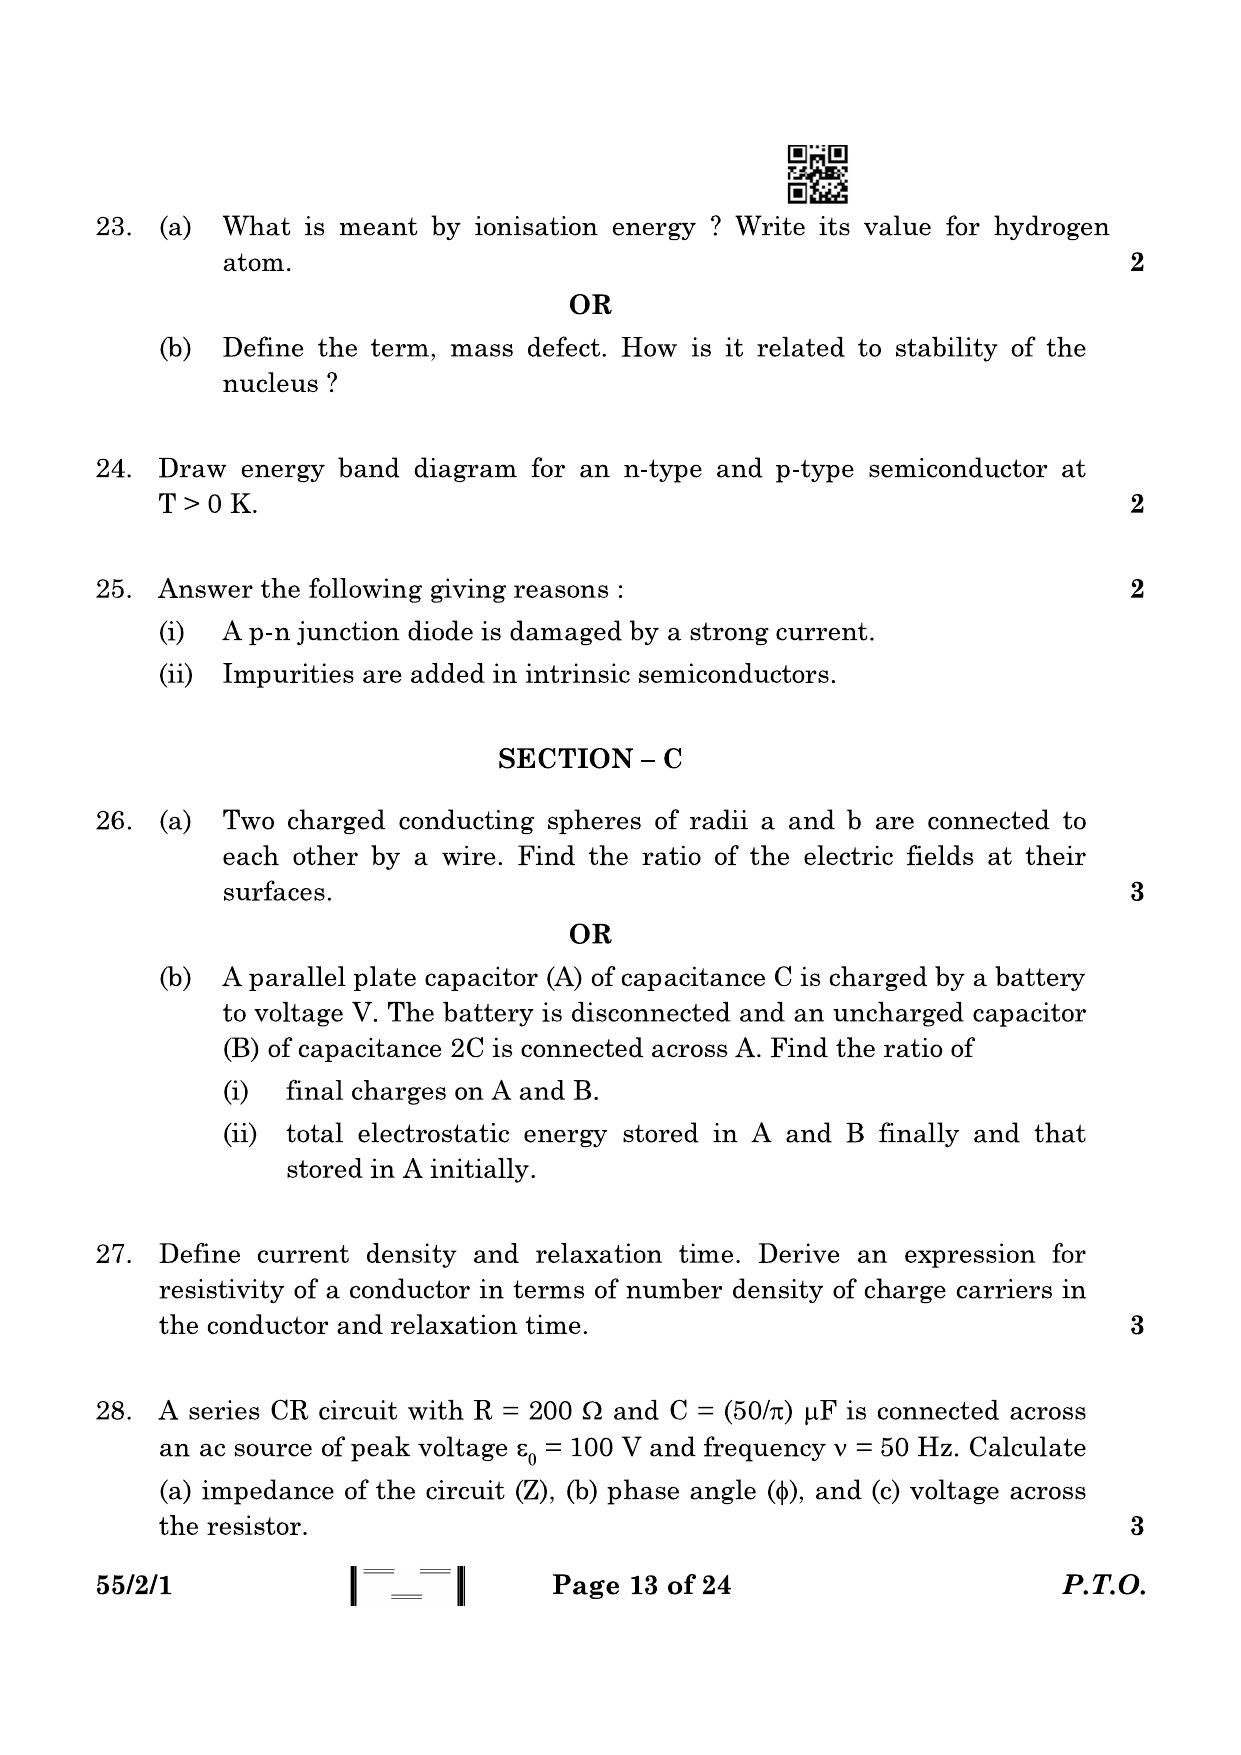 CBSE Class 12 55-2-1 Physics 2023 Question Paper - Page 13